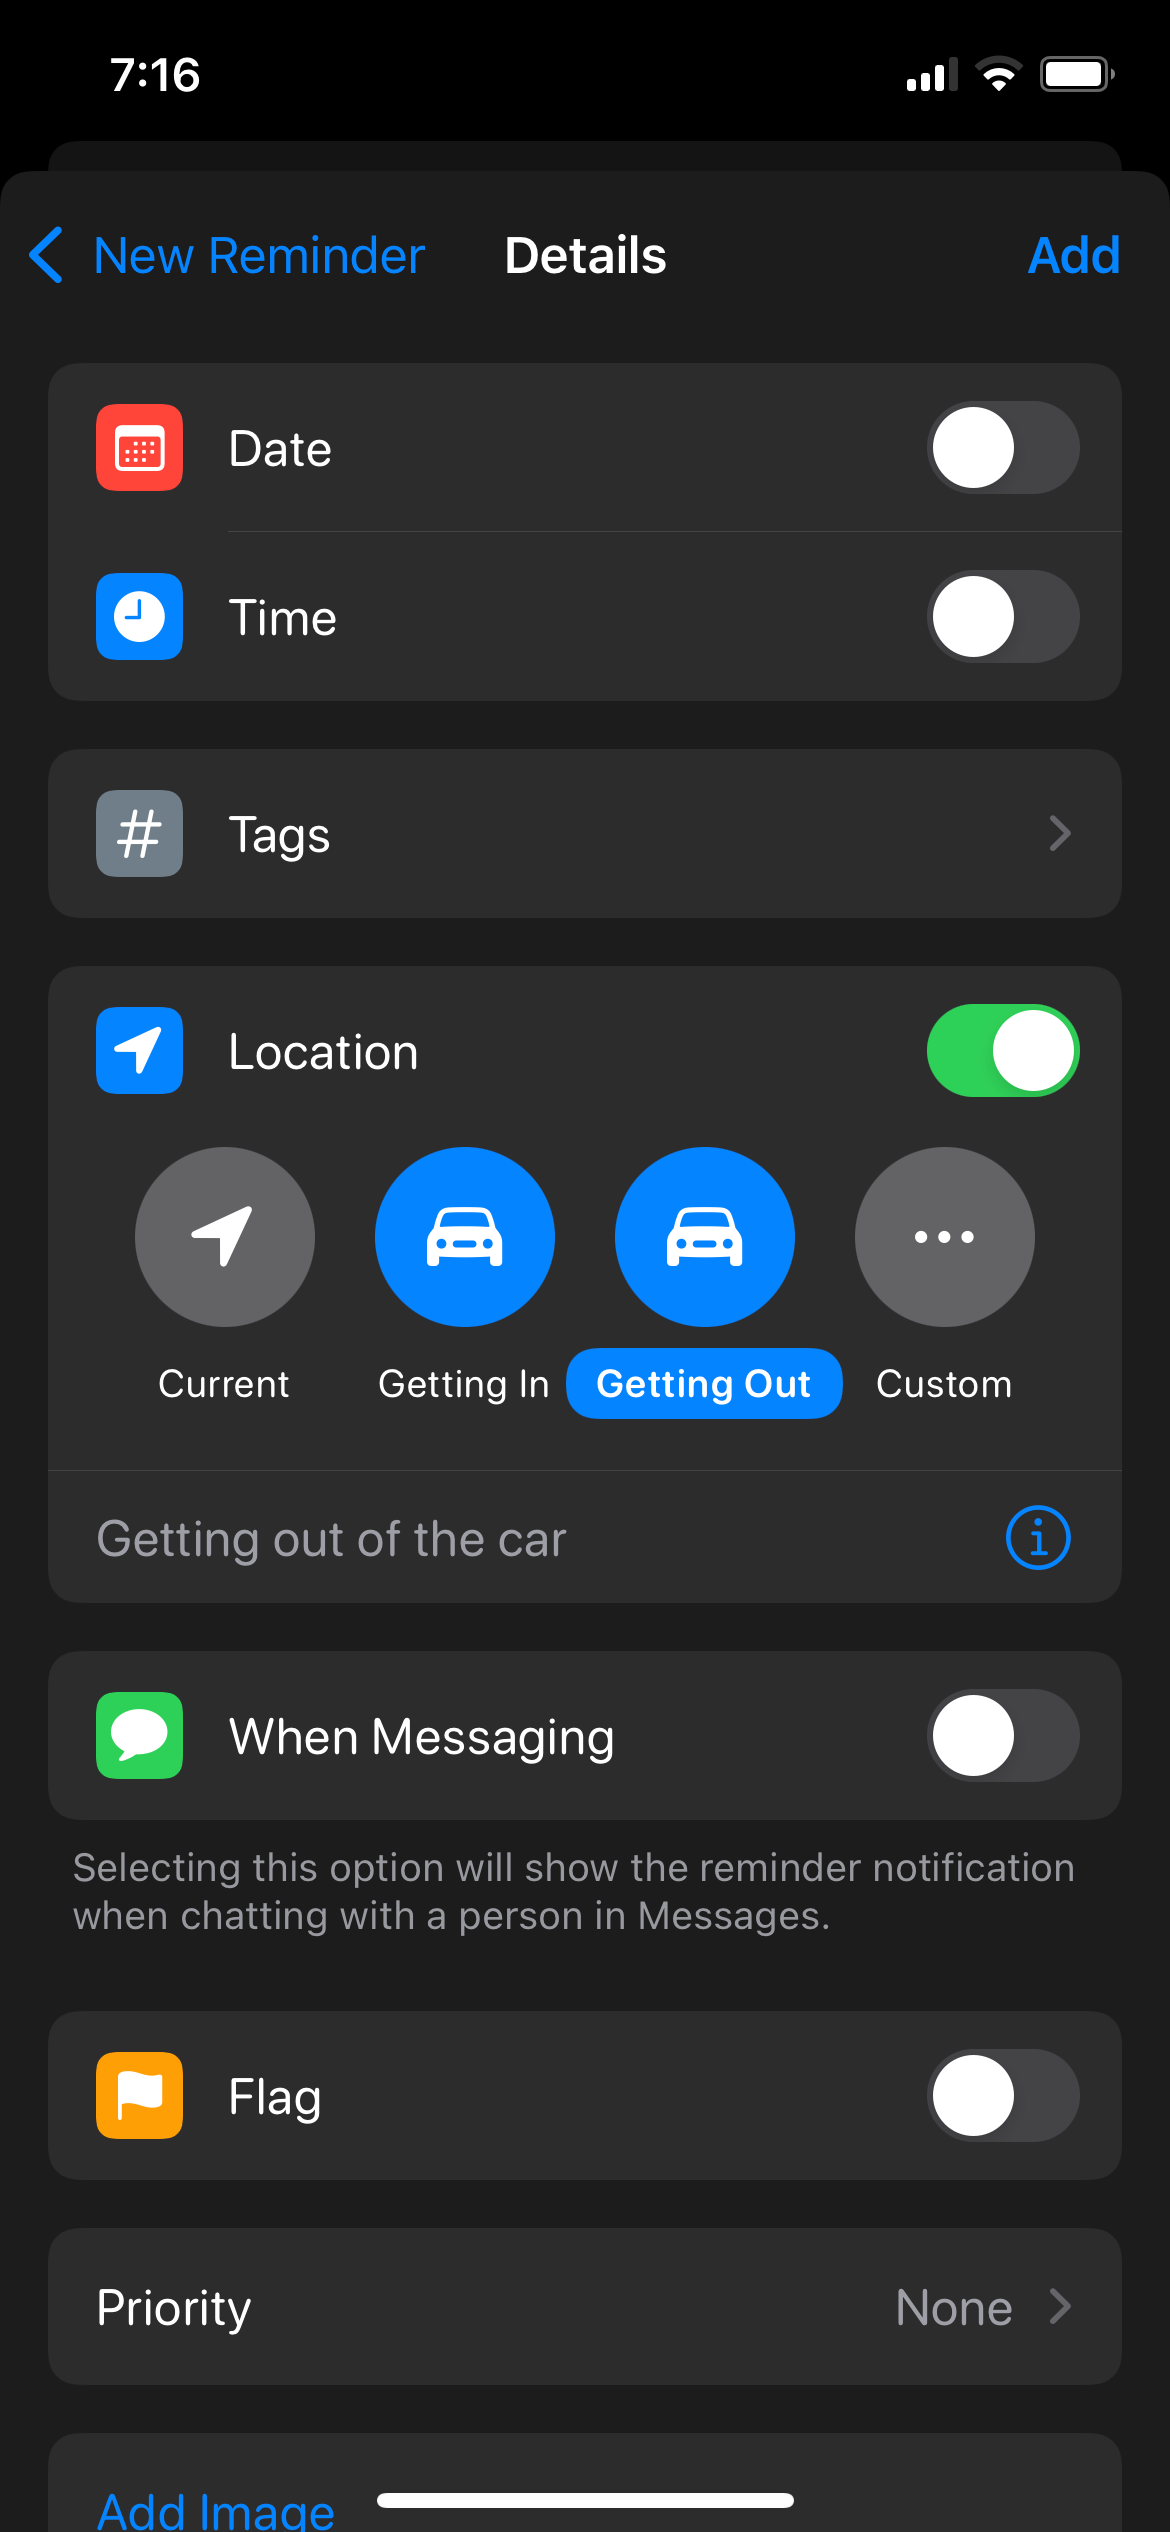 Location Filter on Reminders